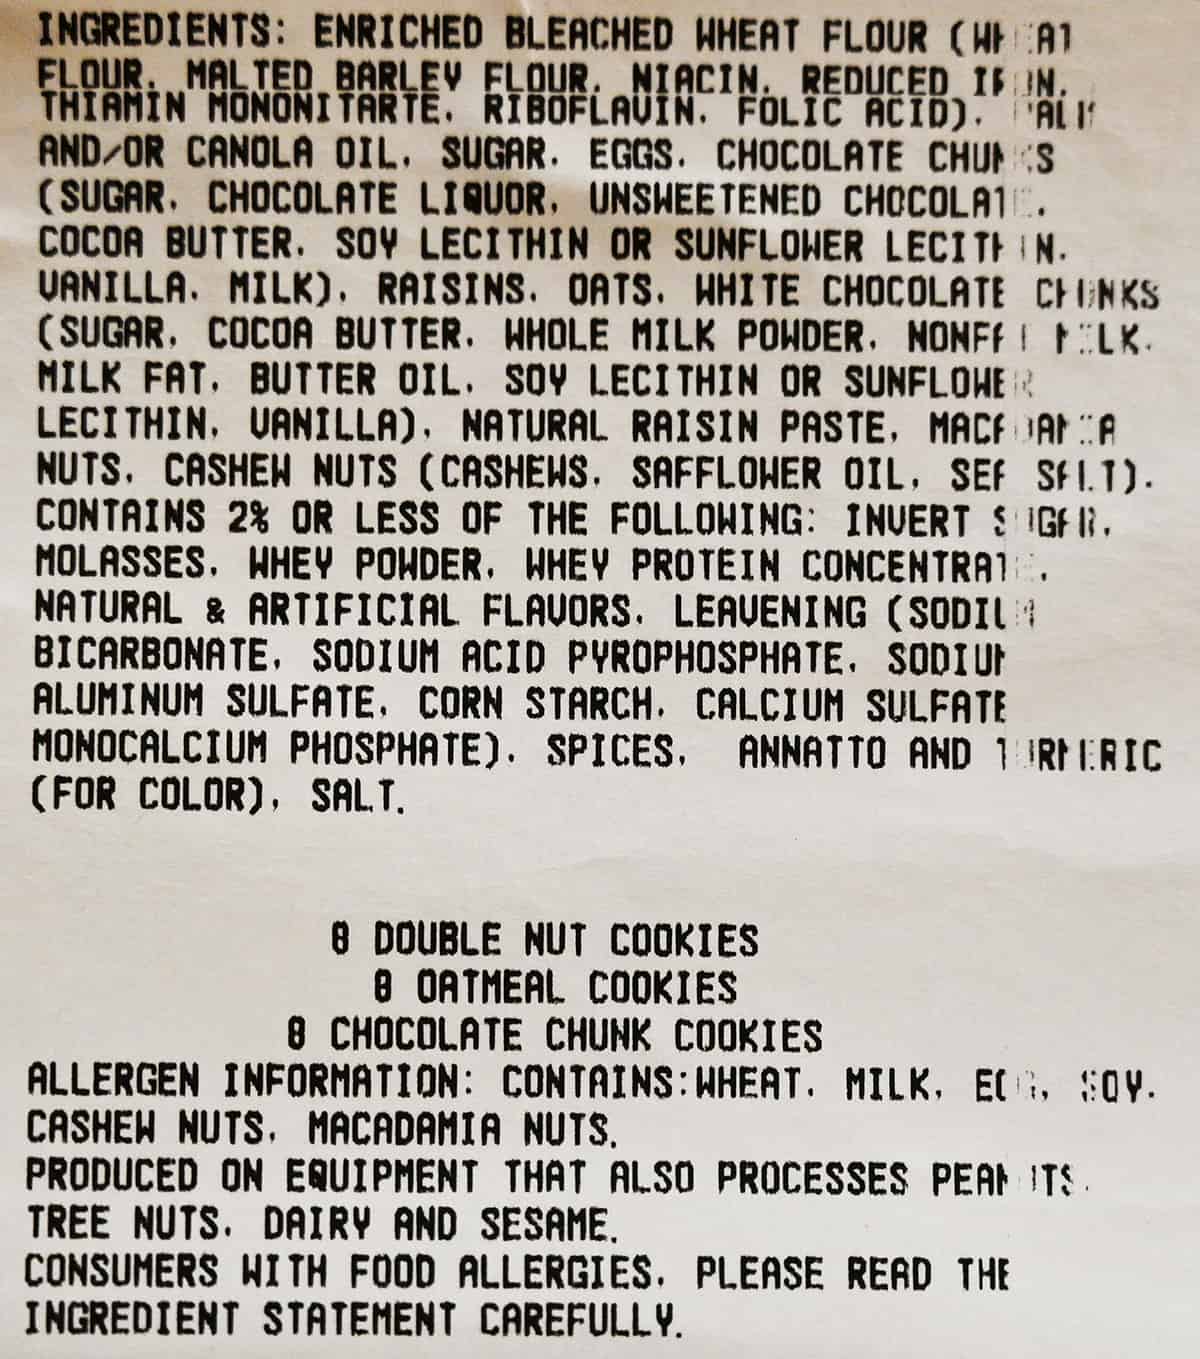 Image of the ingredients for the cookies from the label on the package.